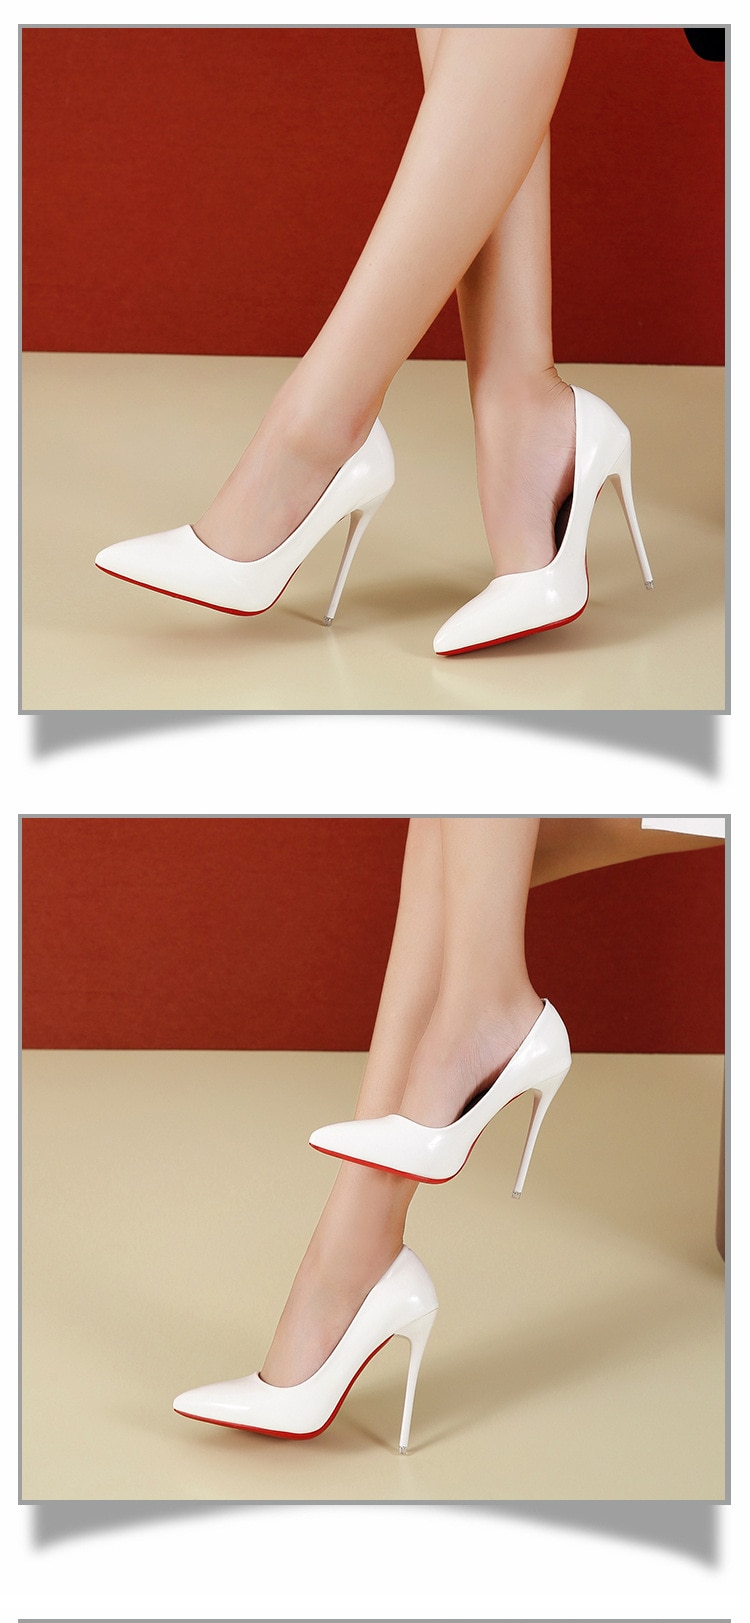 2023 New Red High Heels 35-45 Plus Size Women Shoes 12cm Thin Stiletto Banquet Wedding Shoes Sexy Pointed Toe Ladies Party Shoes